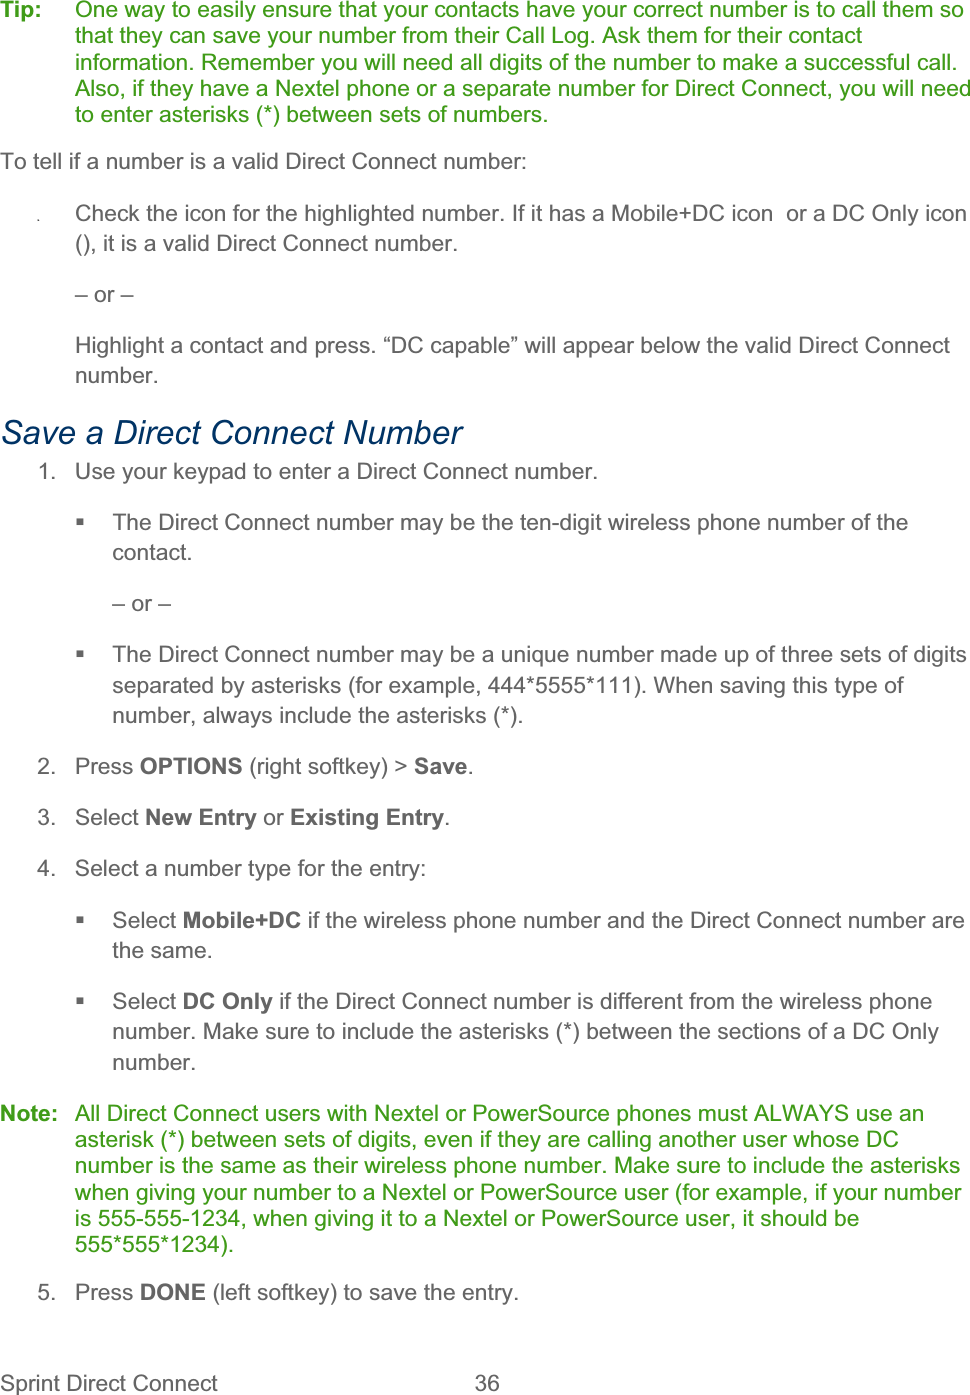 Sprint Direct Connect  36   Tip:  One way to easily ensure that your contacts have your correct number is to call them so that they can save your number from their Call Log. Ask them for their contact information. Remember you will need all digits of the number to make a successful call. Also, if they have a Nextel phone or a separate number for Direct Connect, you will need to enter asterisks (*) between sets of numbers. To tell if a number is a valid Direct Connect number: ʇCheck the icon for the highlighted number. If it has a Mobile+DC icon  or a DC Only icon (), it is a valid Direct Connect number. – or – Highlight a contact and press. “DC capable” will appear below the valid Direct Connect number.Save a Direct Connect Number 1.  Use your keypad to enter a Direct Connect number.   The Direct Connect number may be the ten-digit wireless phone number of the contact.– or –   The Direct Connect number may be a unique number made up of three sets of digits separated by asterisks (for example, 444*5555*111). When saving this type of number, always include the asterisks (*). 2. Press OPTIONS (right softkey) &gt; Save.3. Select New Entry or Existing Entry.4.  Select a number type for the entry:  Select Mobile+DC if the wireless phone number and the Direct Connect number are the same.  Select DC Only if the Direct Connect number is different from the wireless phone number. Make sure to include the asterisks (*) between the sections of a DC Only number.Note:  All Direct Connect users with Nextel or PowerSource phones must ALWAYS use an asterisk (*) between sets of digits, even if they are calling another user whose DC number is the same as their wireless phone number. Make sure to include the asterisks when giving your number to a Nextel or PowerSource user (for example, if your number is 555-555-1234, when giving it to a Nextel or PowerSource user, it should be 555*555*1234).5. Press DONE (left softkey) to save the entry. 